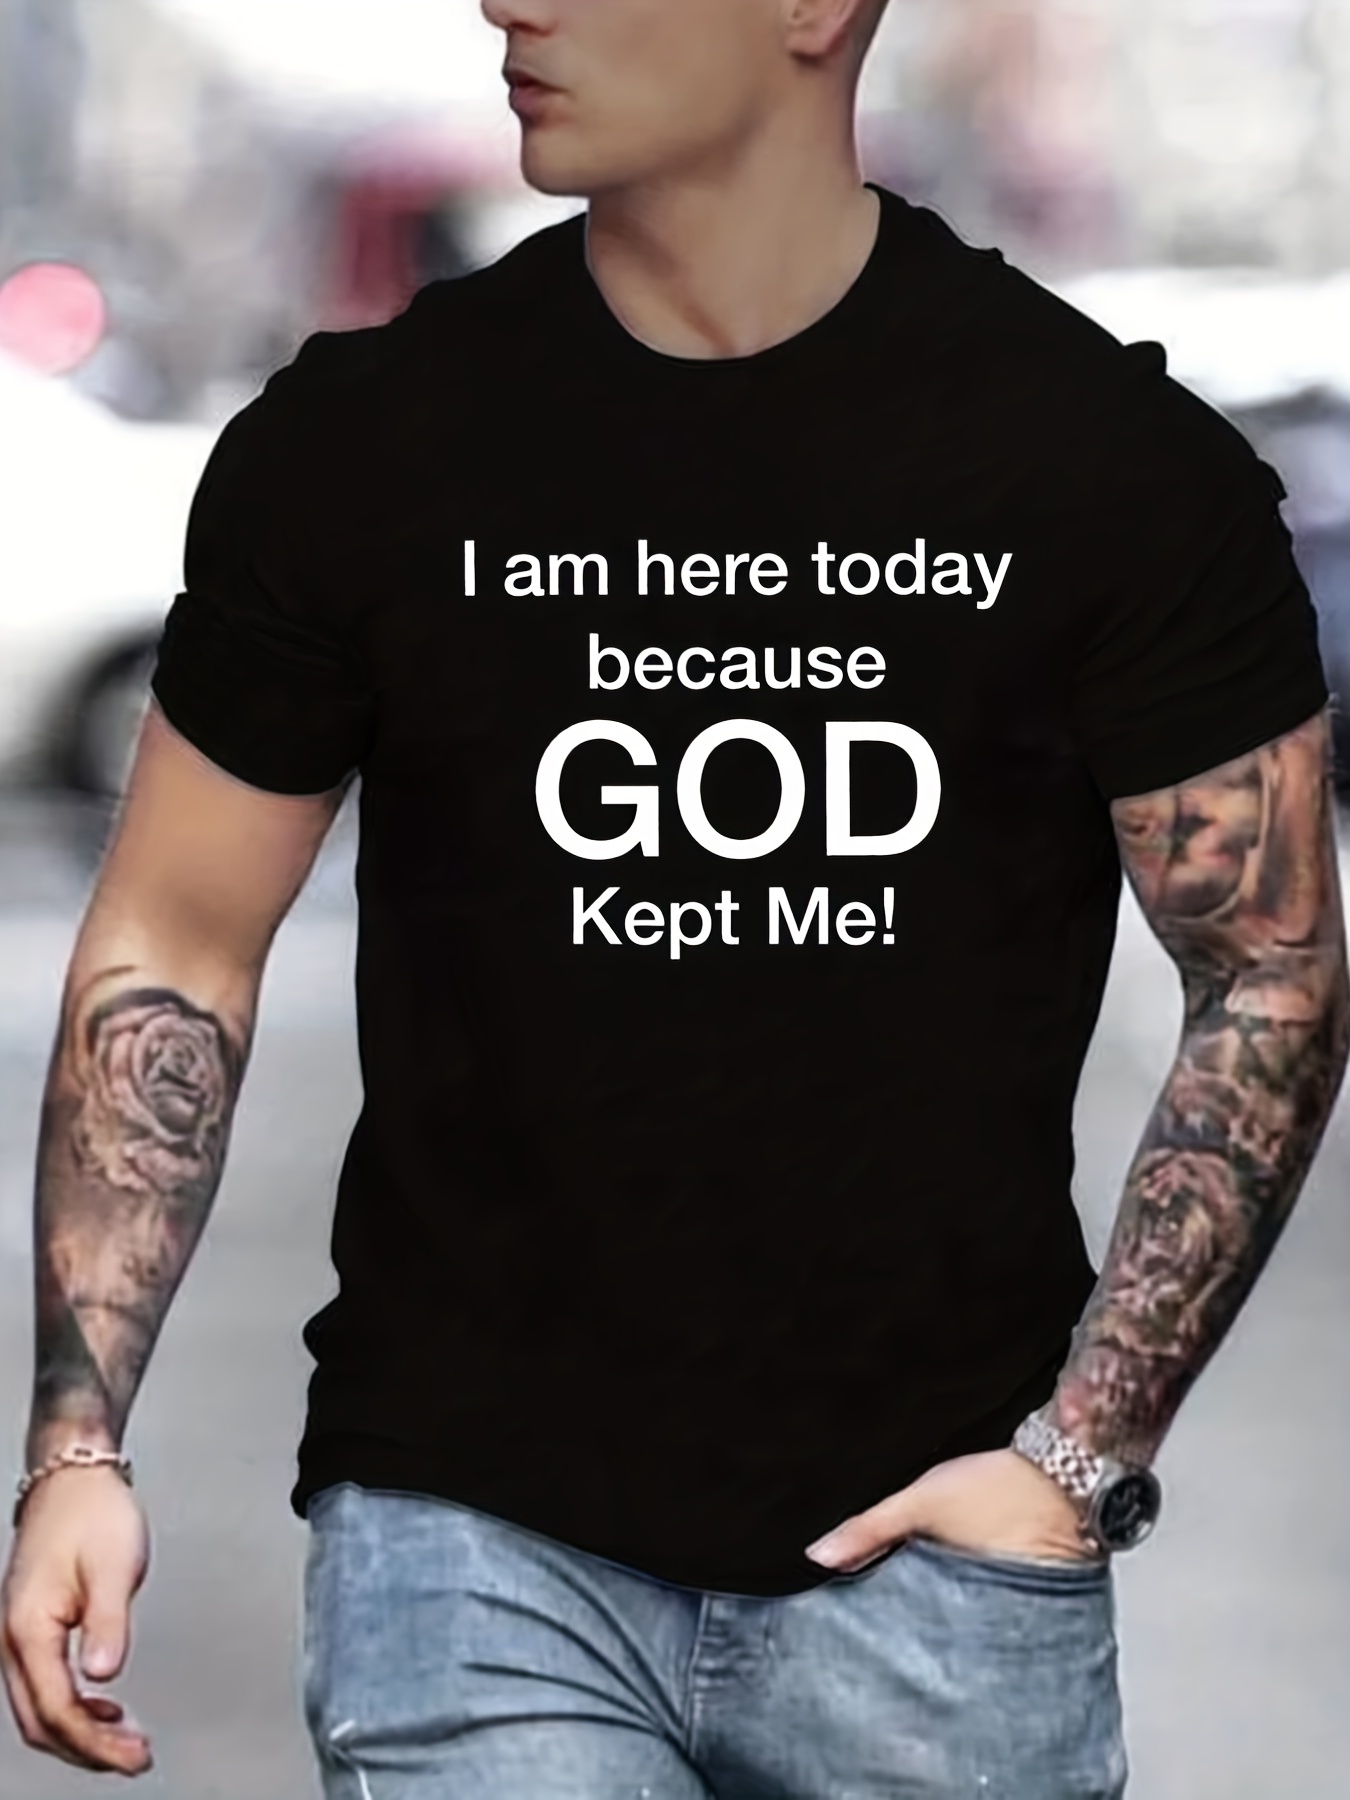 tees for men god kept me print t shirt casual short sleeve tshirt for summer spring fall tops as gifts details 31